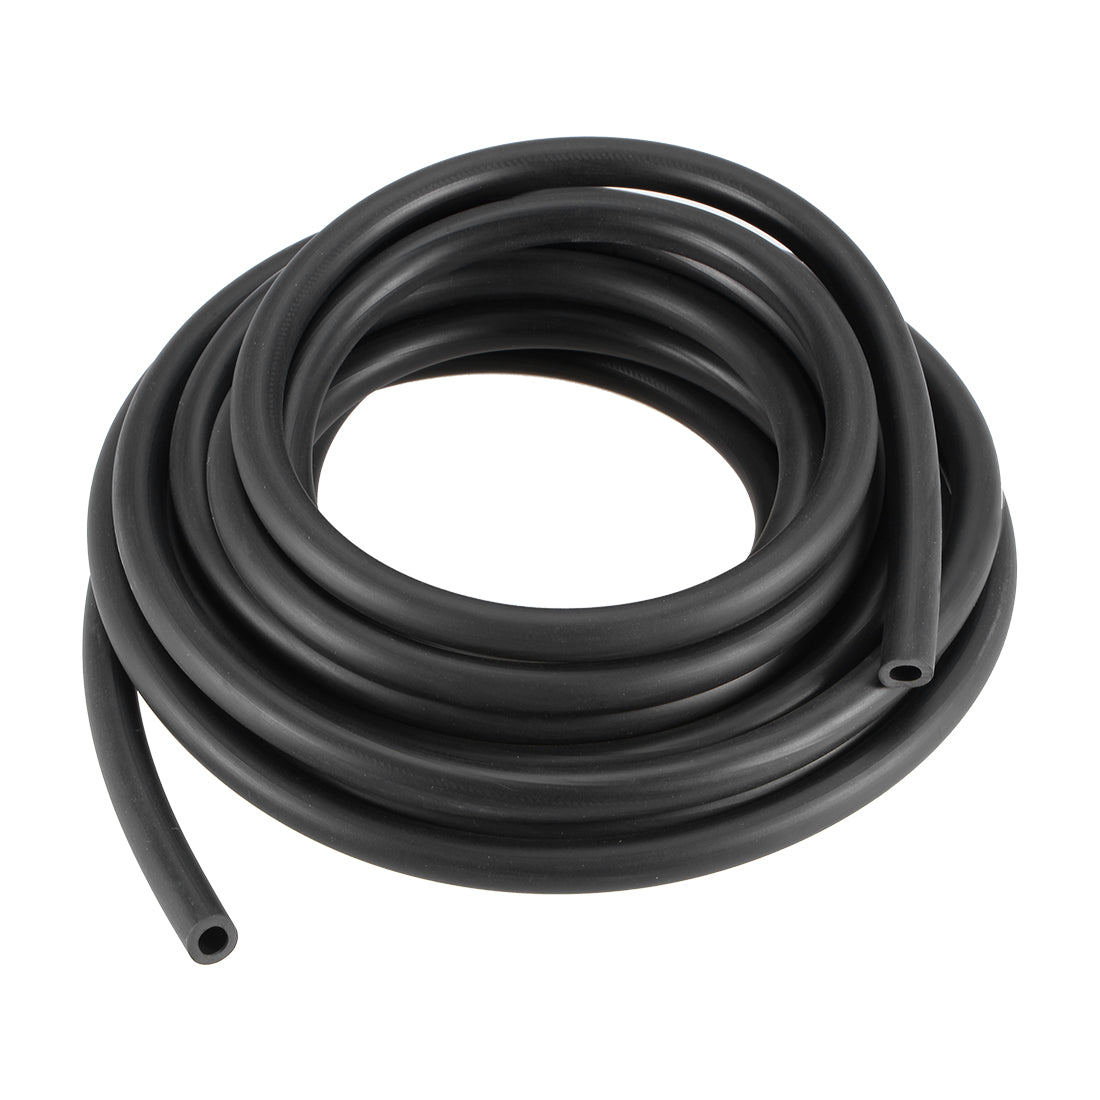 uxcell Uxcell Black Line Hose Tube 5mm(13/64") ID x 8mm(5/16") OD 13.12Ft/4M NBR Water Hose